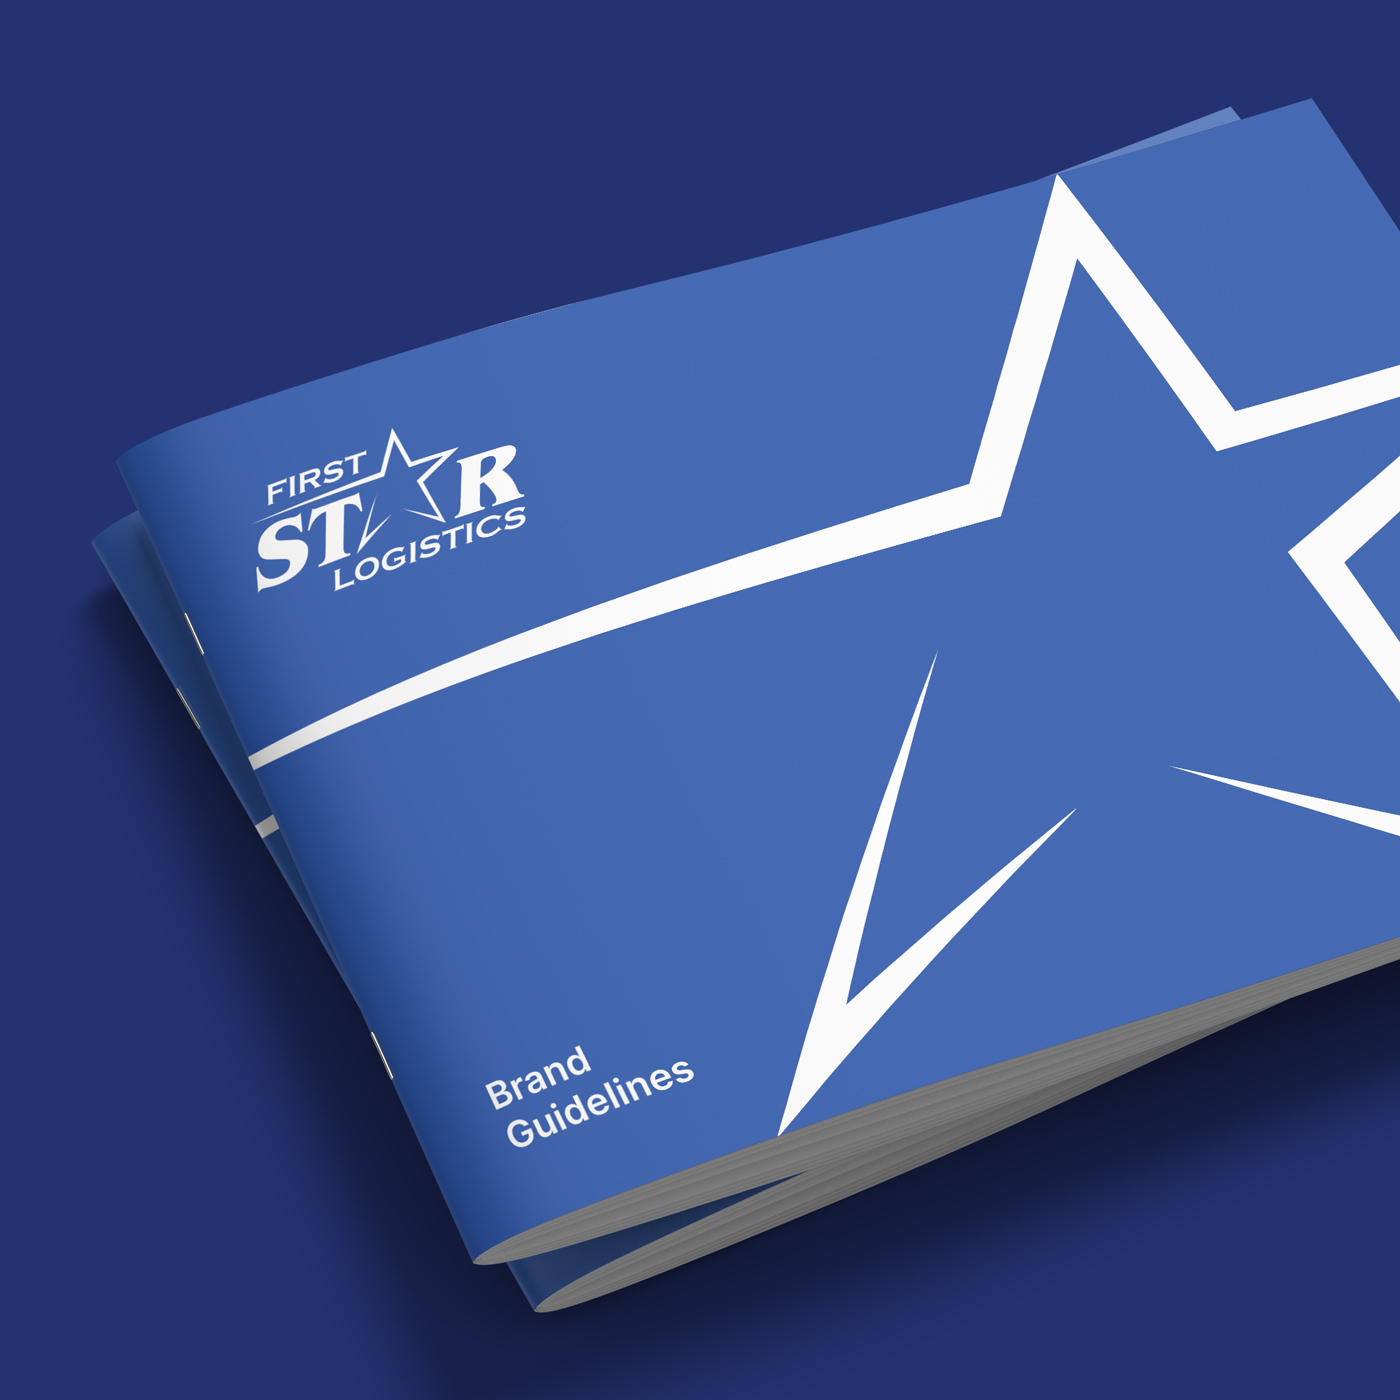 first star logistics brand style guide covers